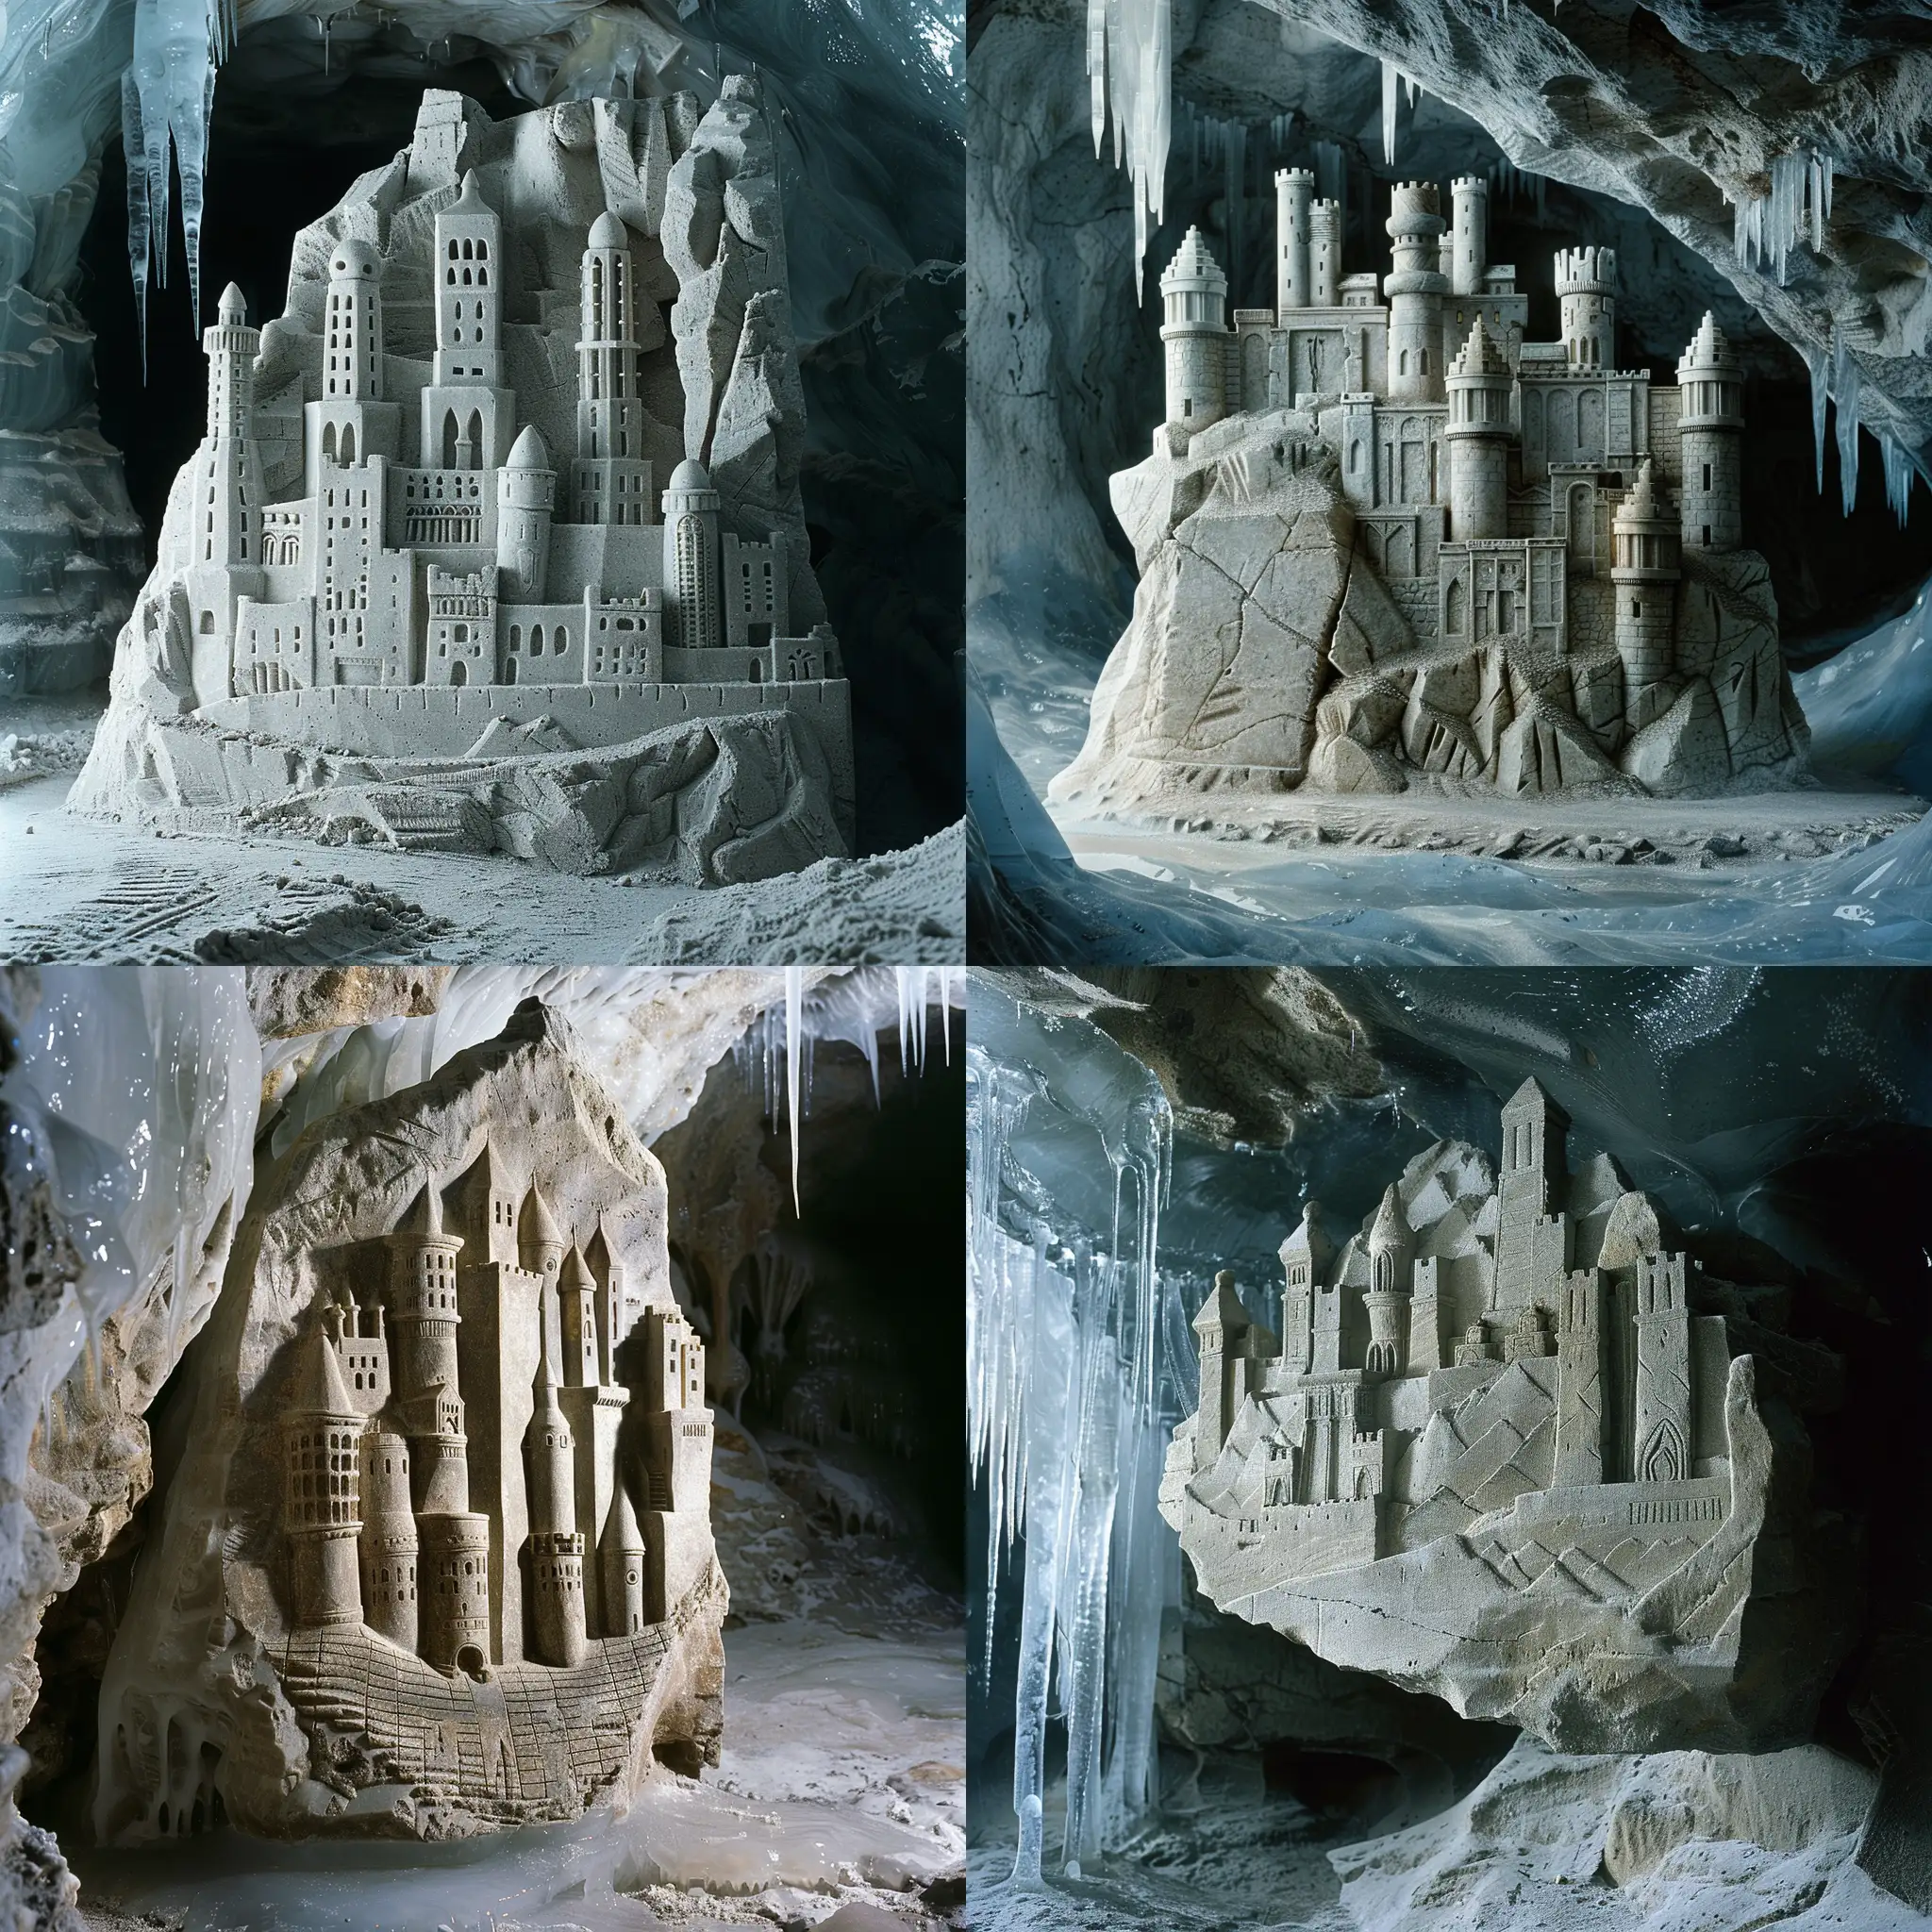 I need a stone relief of a city with 10 towers, in a simple clean style. The relief is in a dark ice cave, partially frozen over.